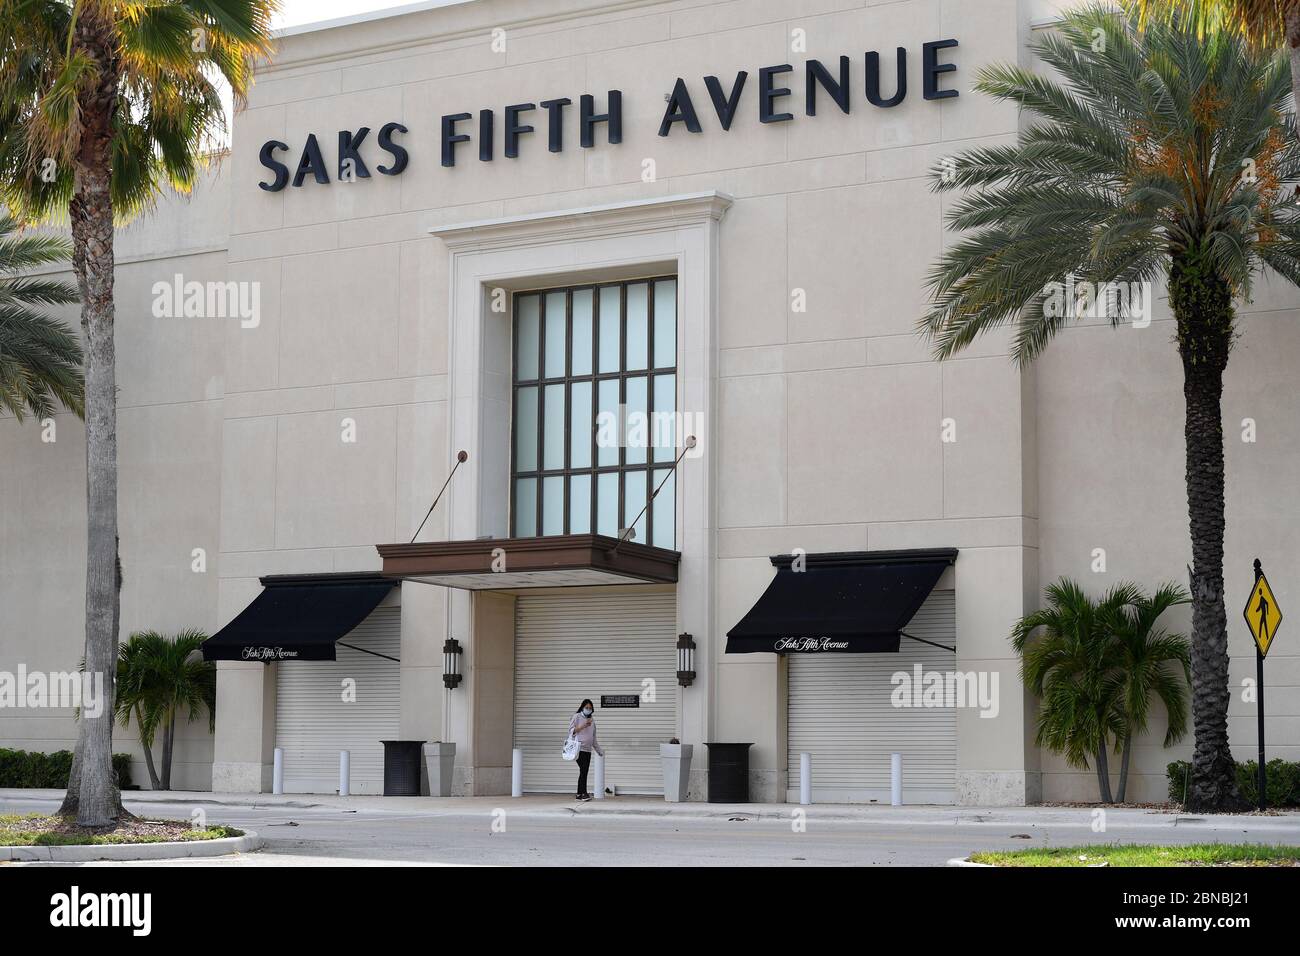 Town Center mall in Boca Raton could see major renovation